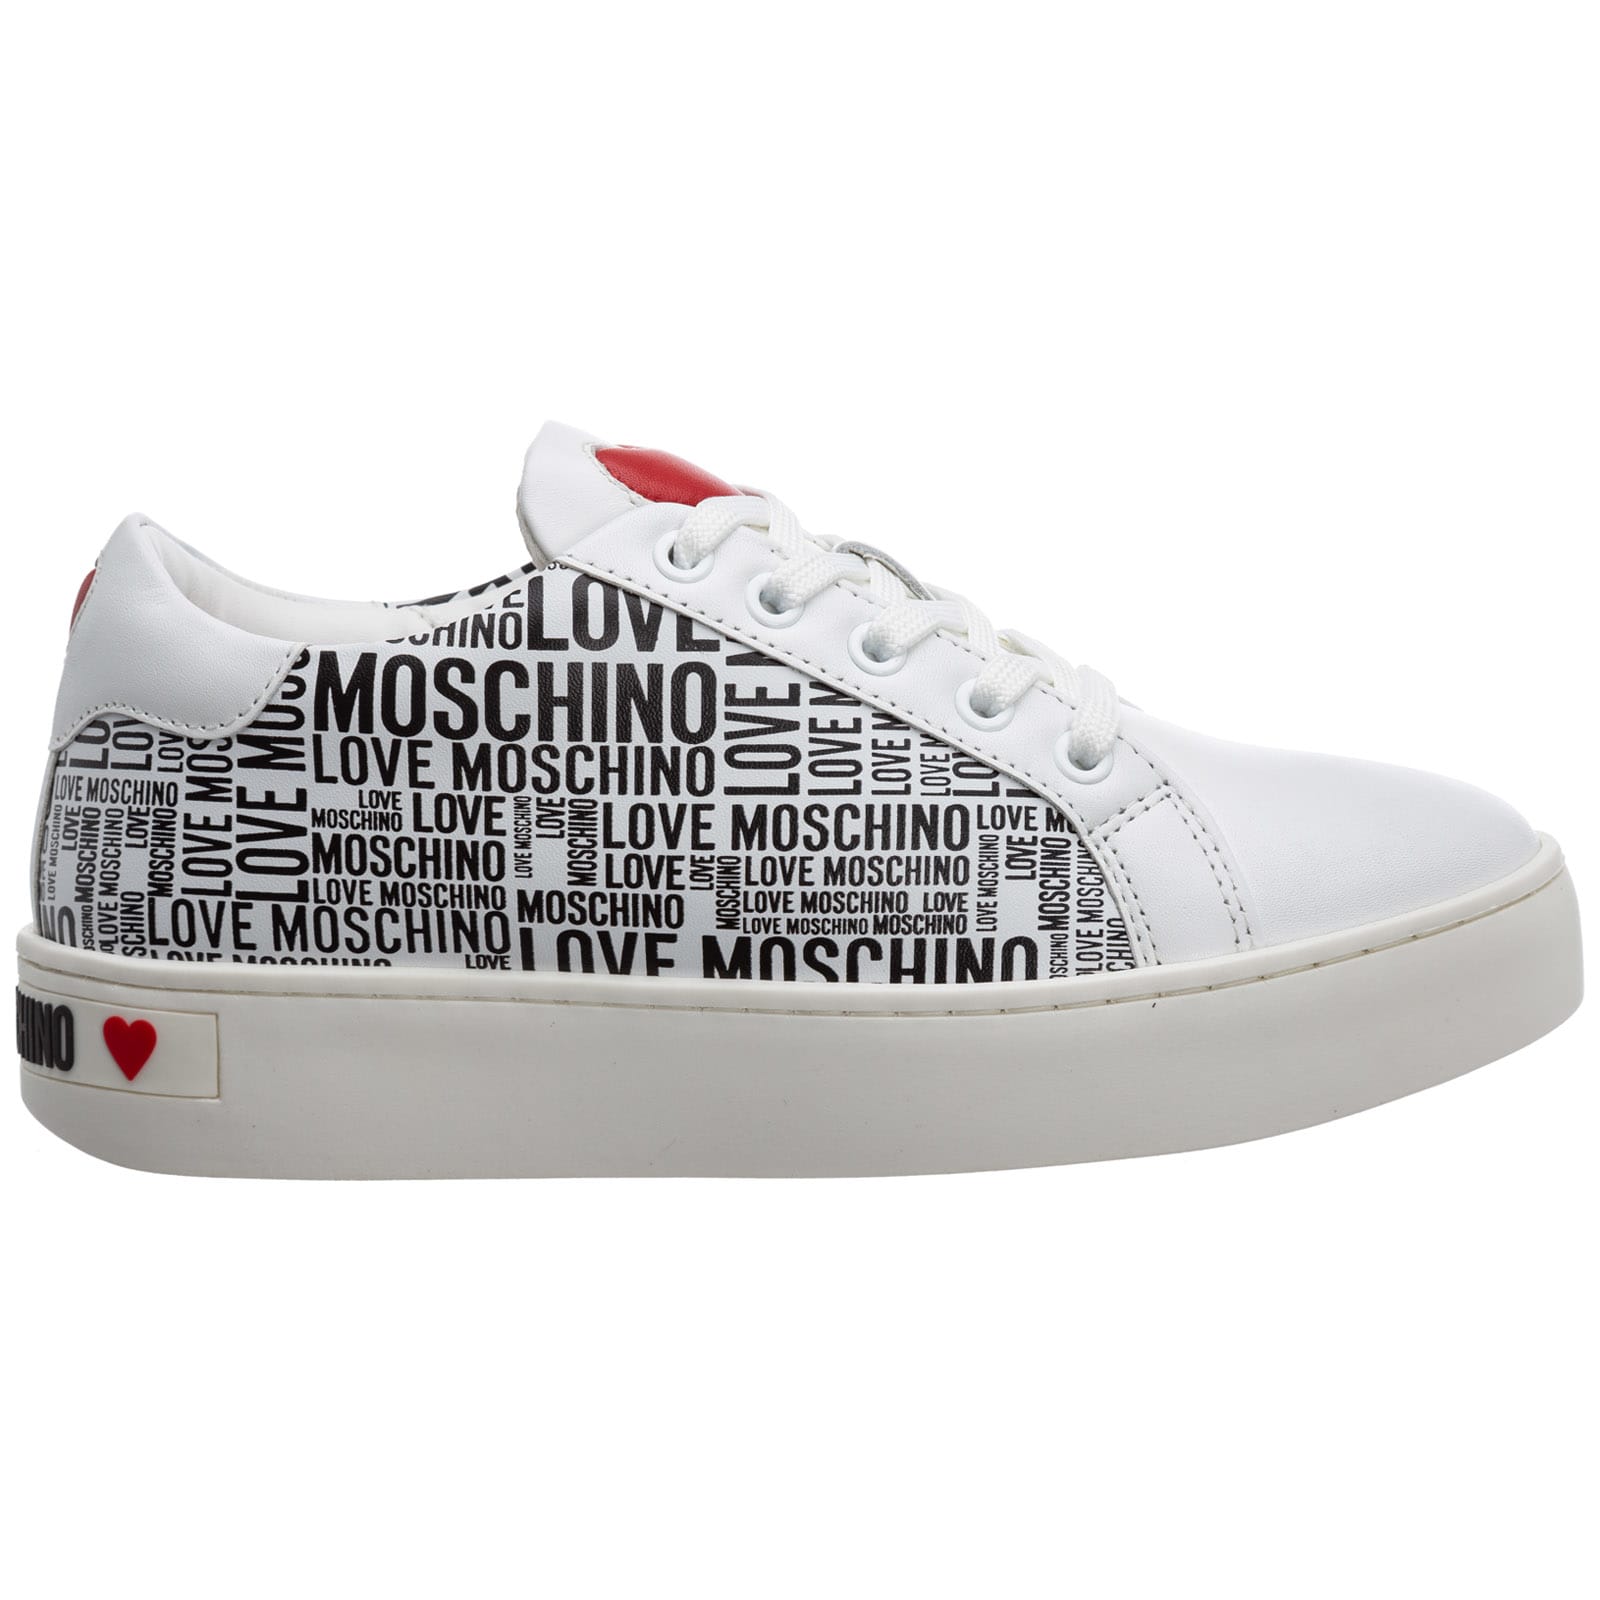 Buy Love Moschino Cassetta Sneakers online, shop Love Moschino shoes with free shipping